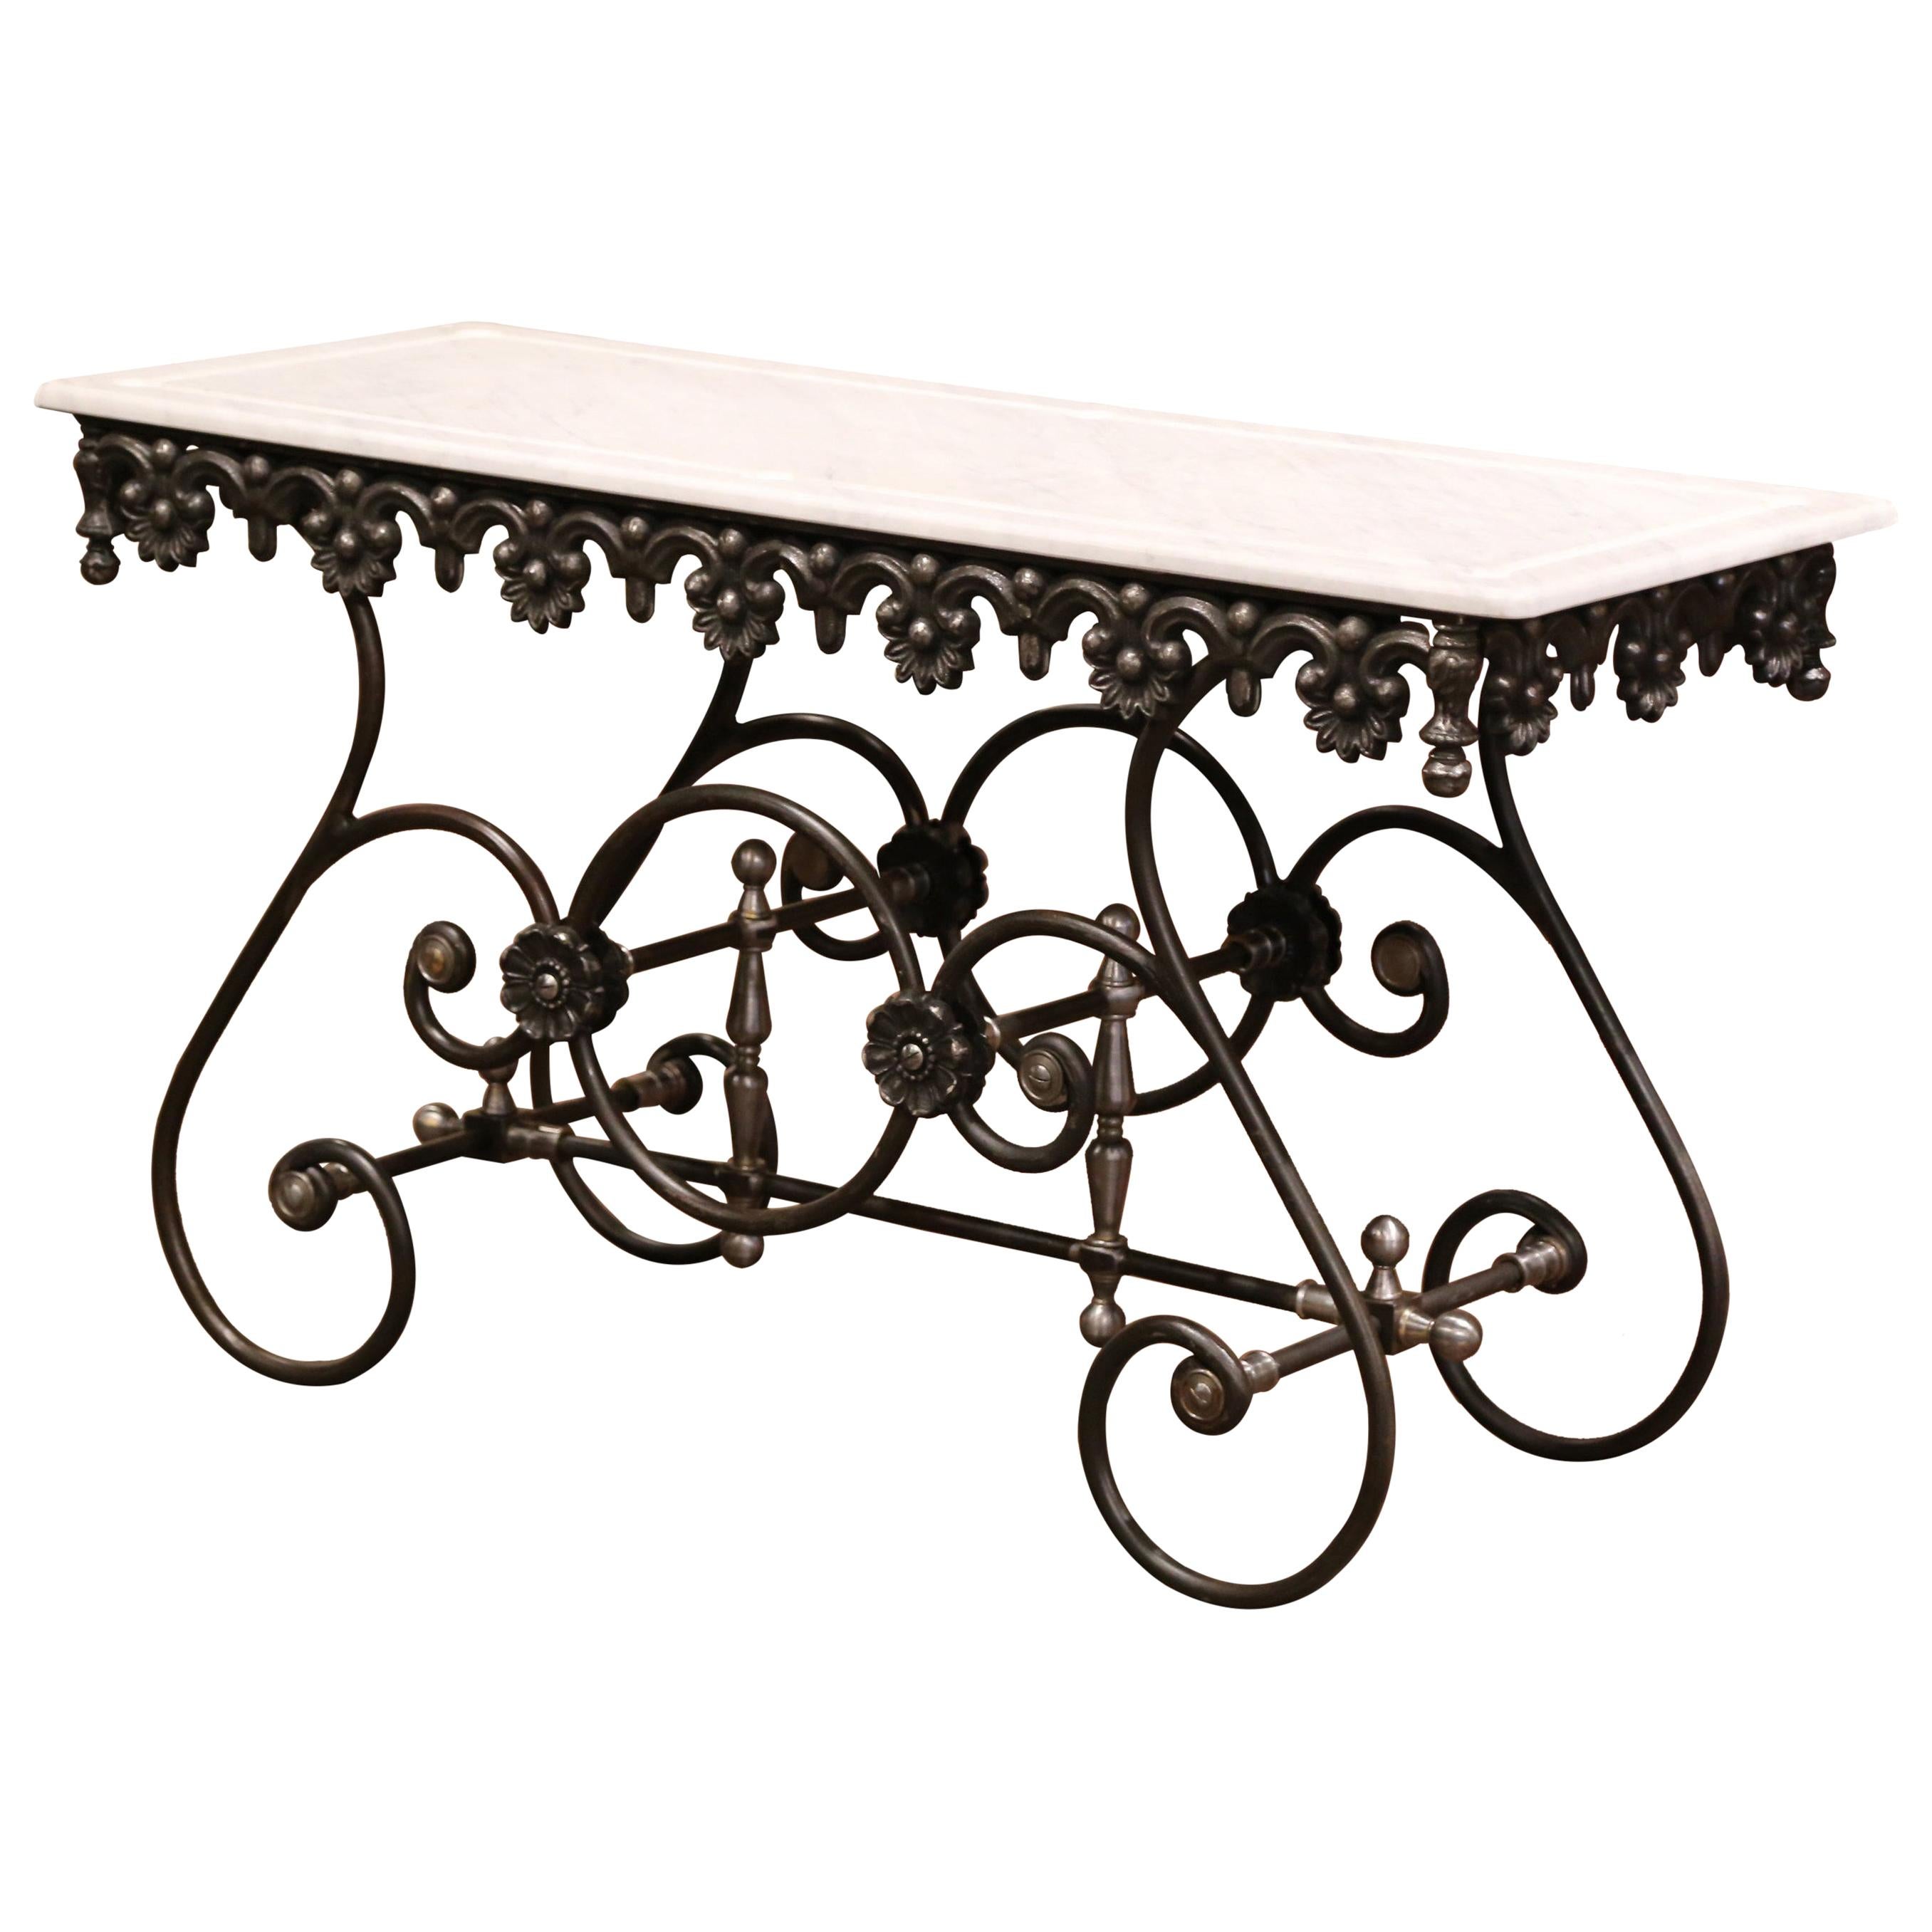 Polished Iron Butcher Pastry Table with White Marble Top from France